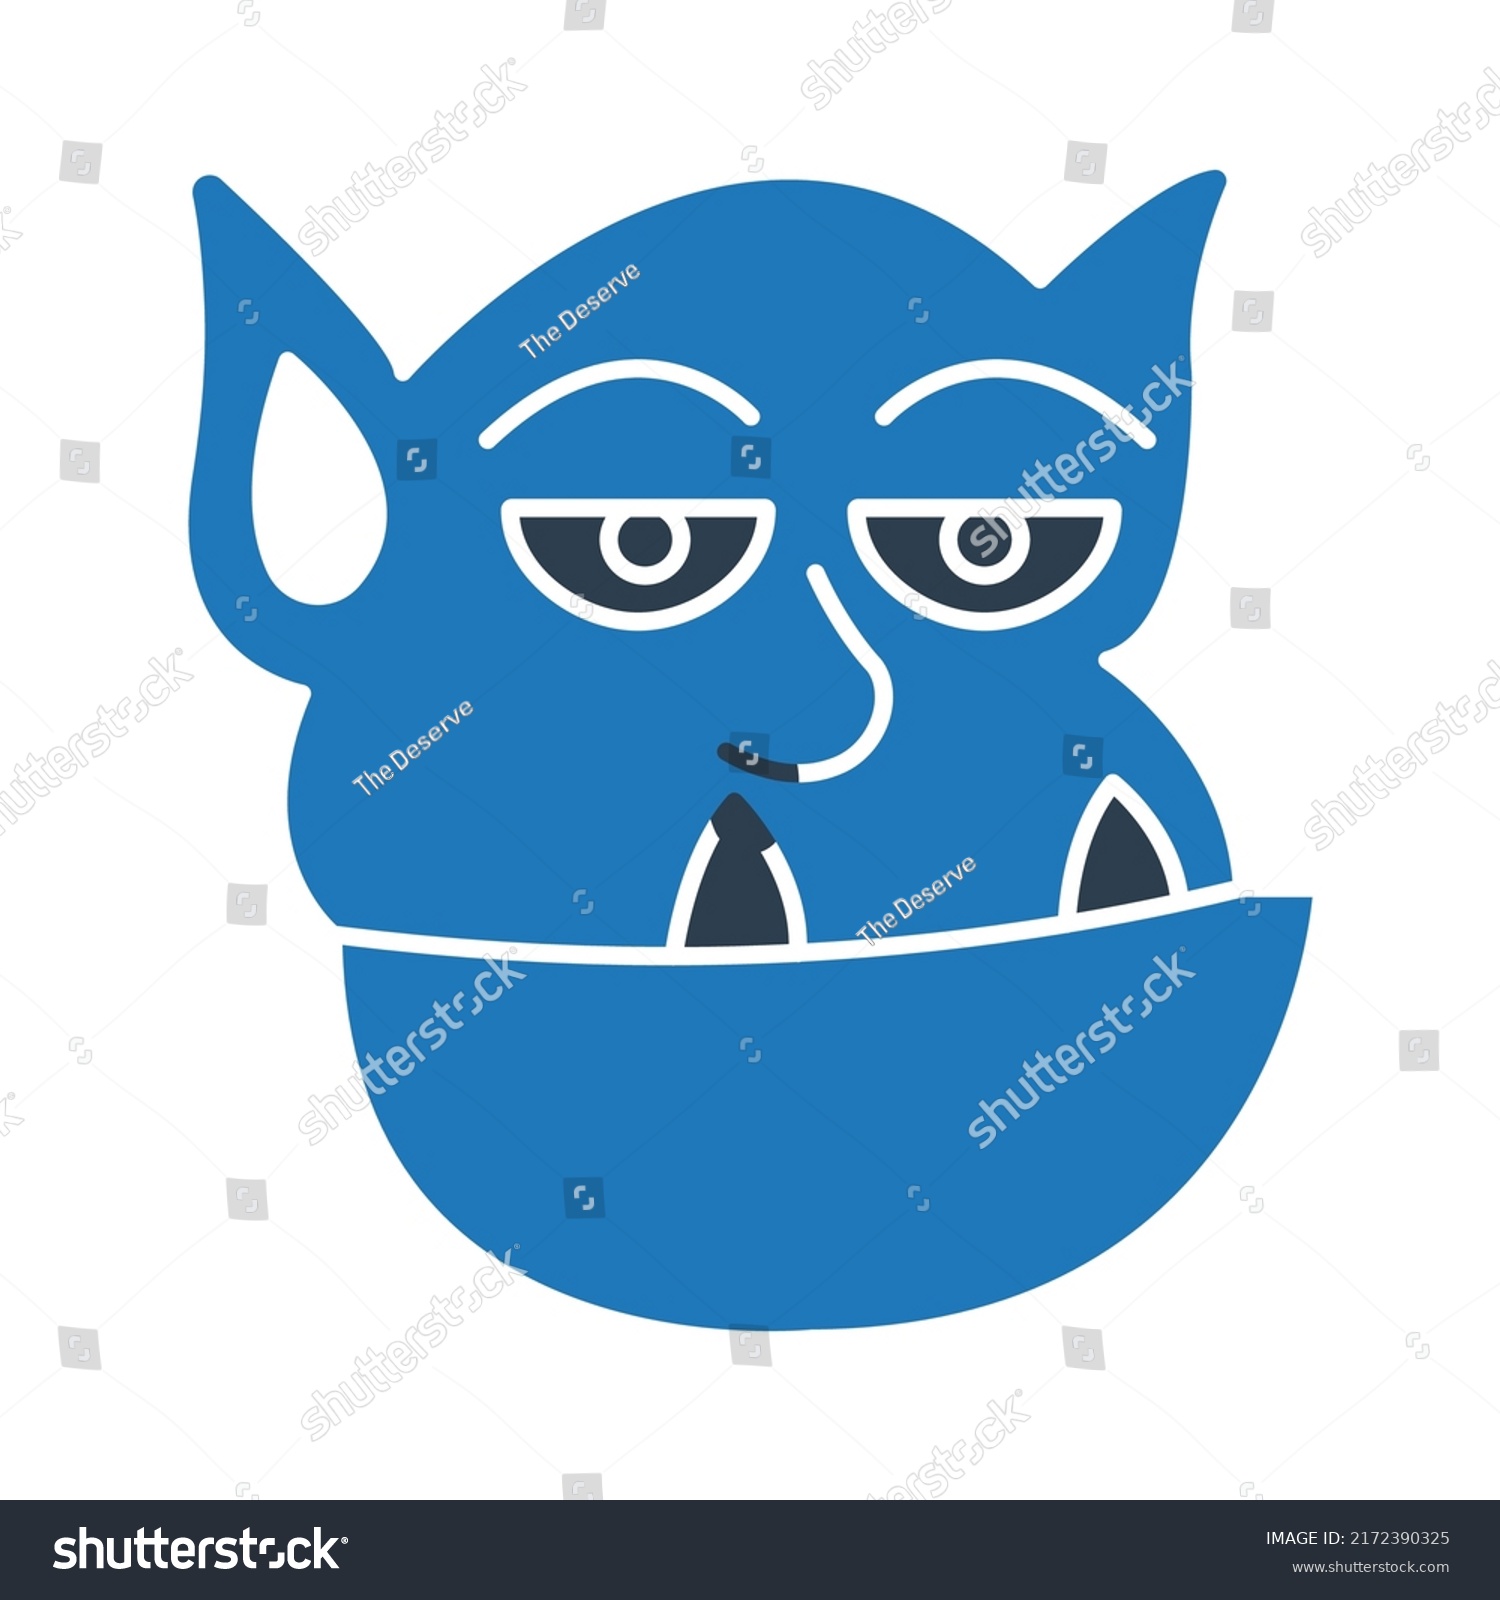 SVG of Ogre Vector icon which is suitable for commercial work and easily modify or edit it
 svg